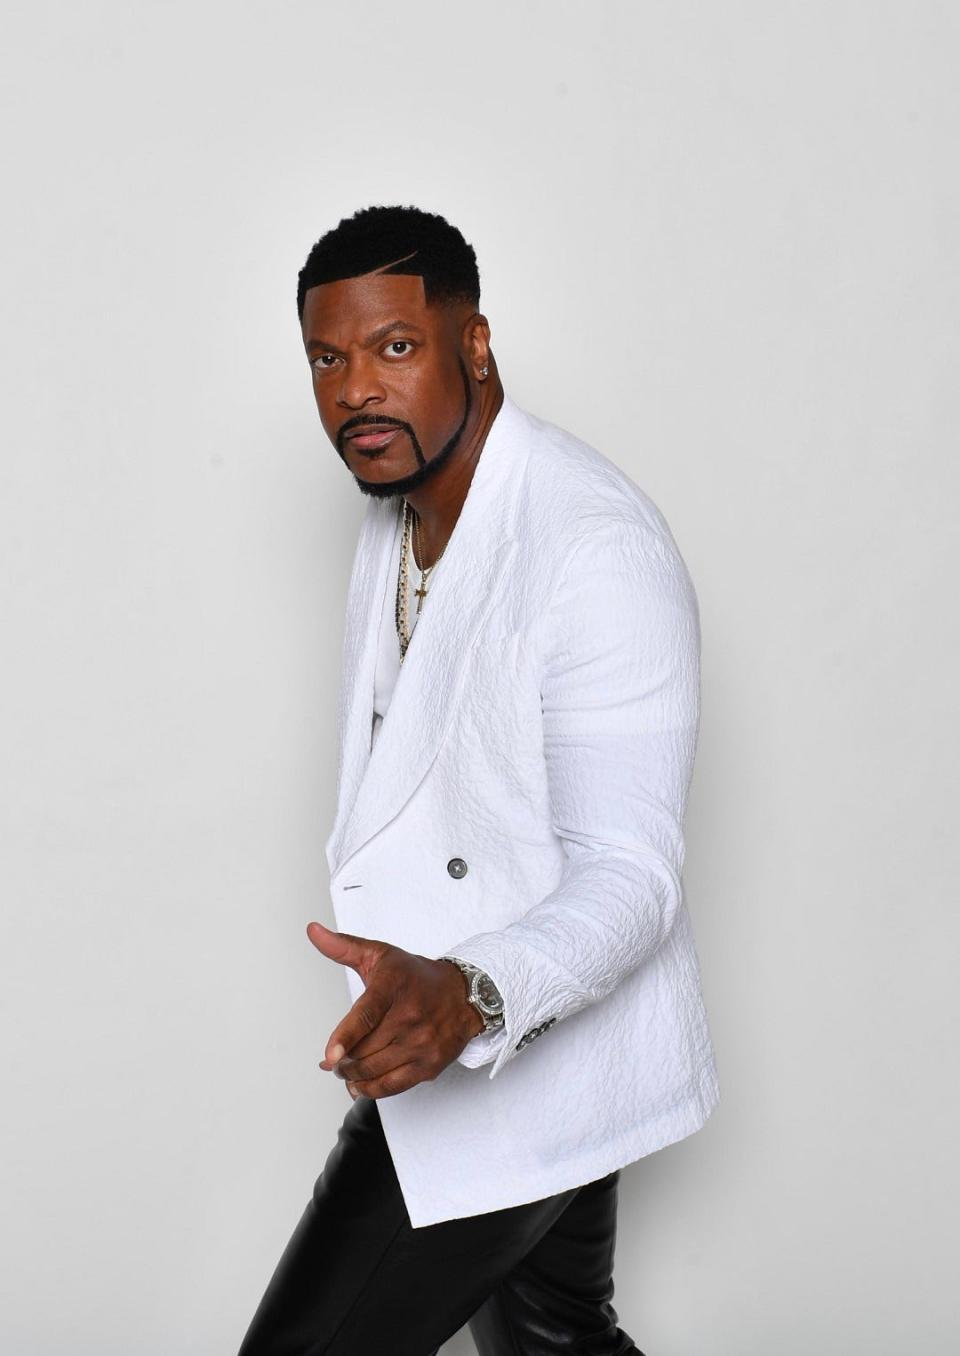 Comedian-actor Chris Tucker is making three stops in Ohio on "The Legend Tour," including a Cincinnati date at Aronoff Center for the Arts on Oct. 11.